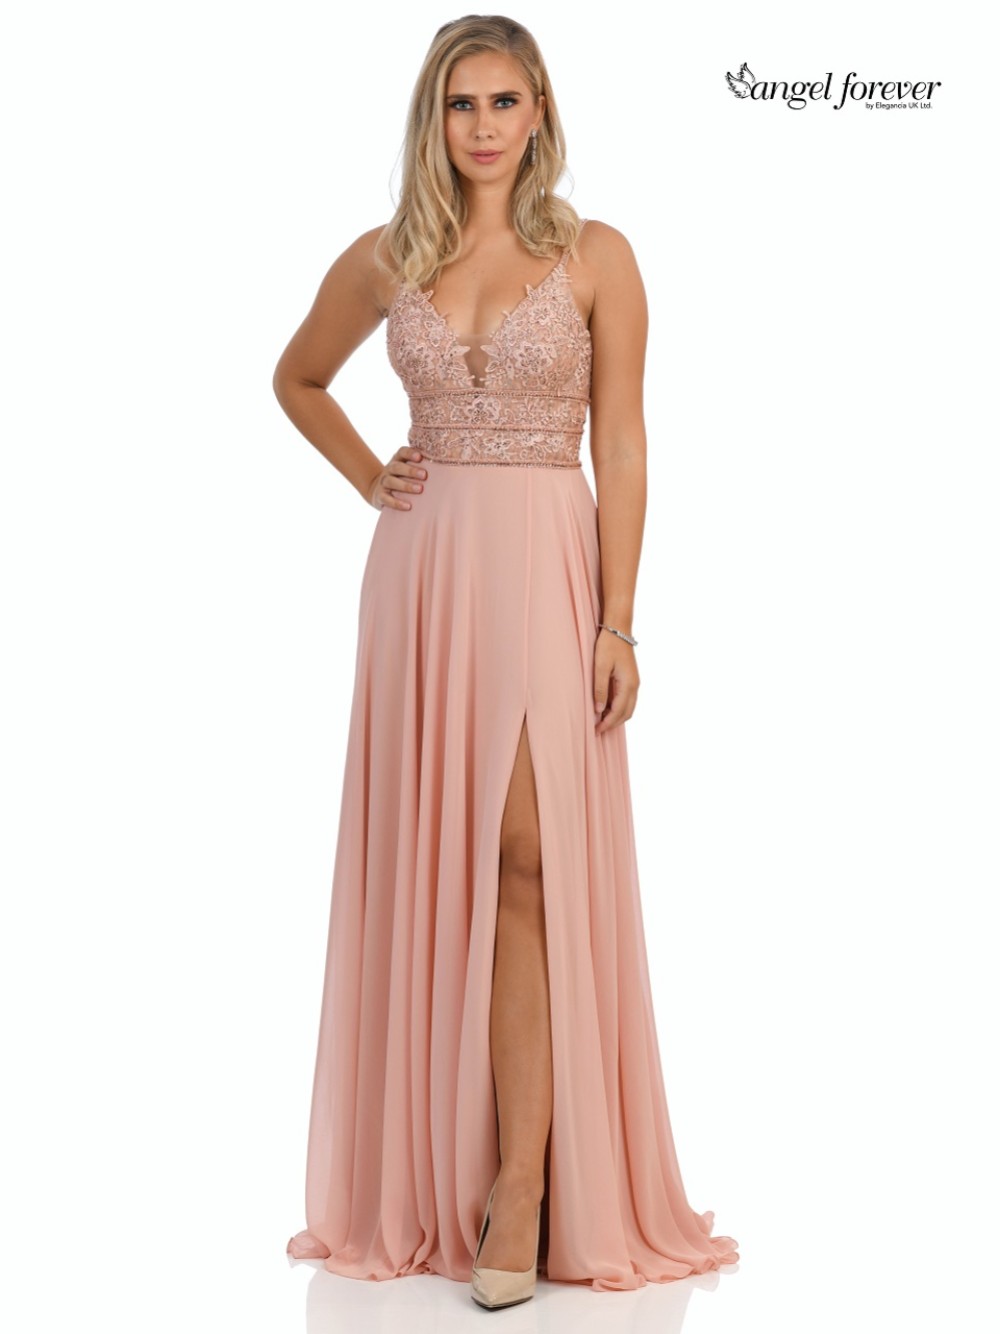 Photograph of Angel Forever Beaded Lace A Line Chiffon Prom Dress with Slit (Rose Pink)